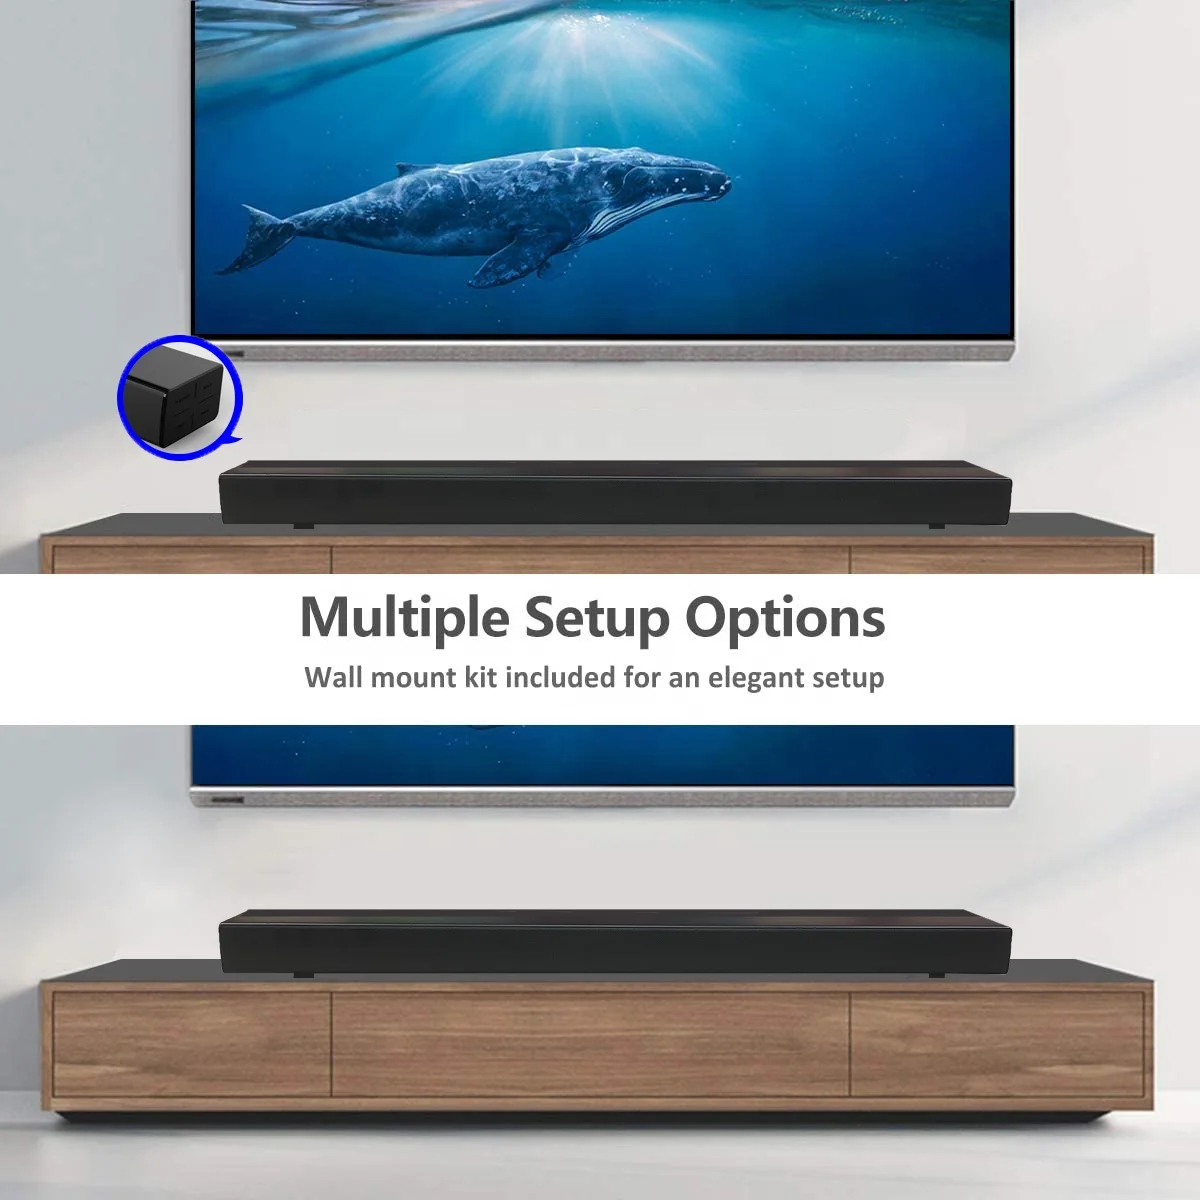 Newest 2022 Built in Subwoofer Sound bar 3D Surround Home theatre system DSP Bluetooth Wireless Soundbar For TV Phone Computer